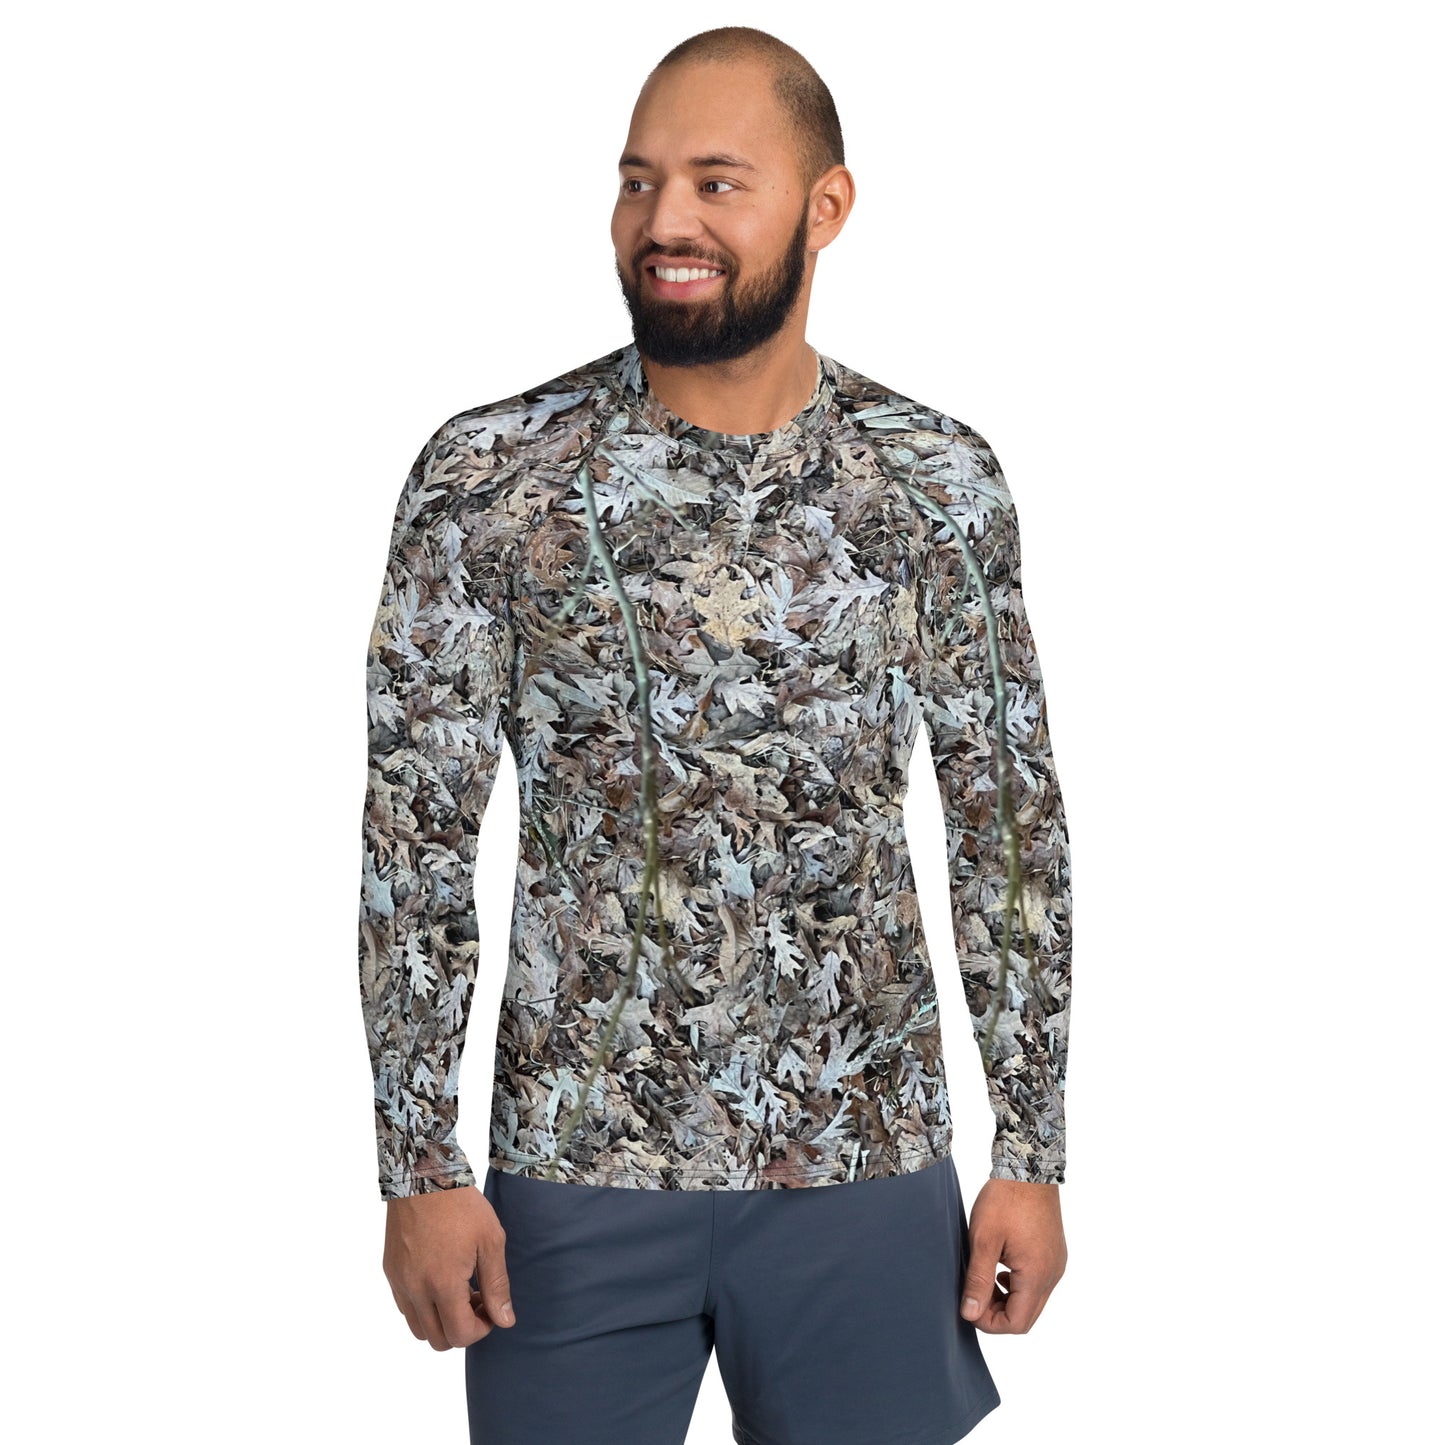 Southern Cameaux Ground Cover Men's Rash Guard